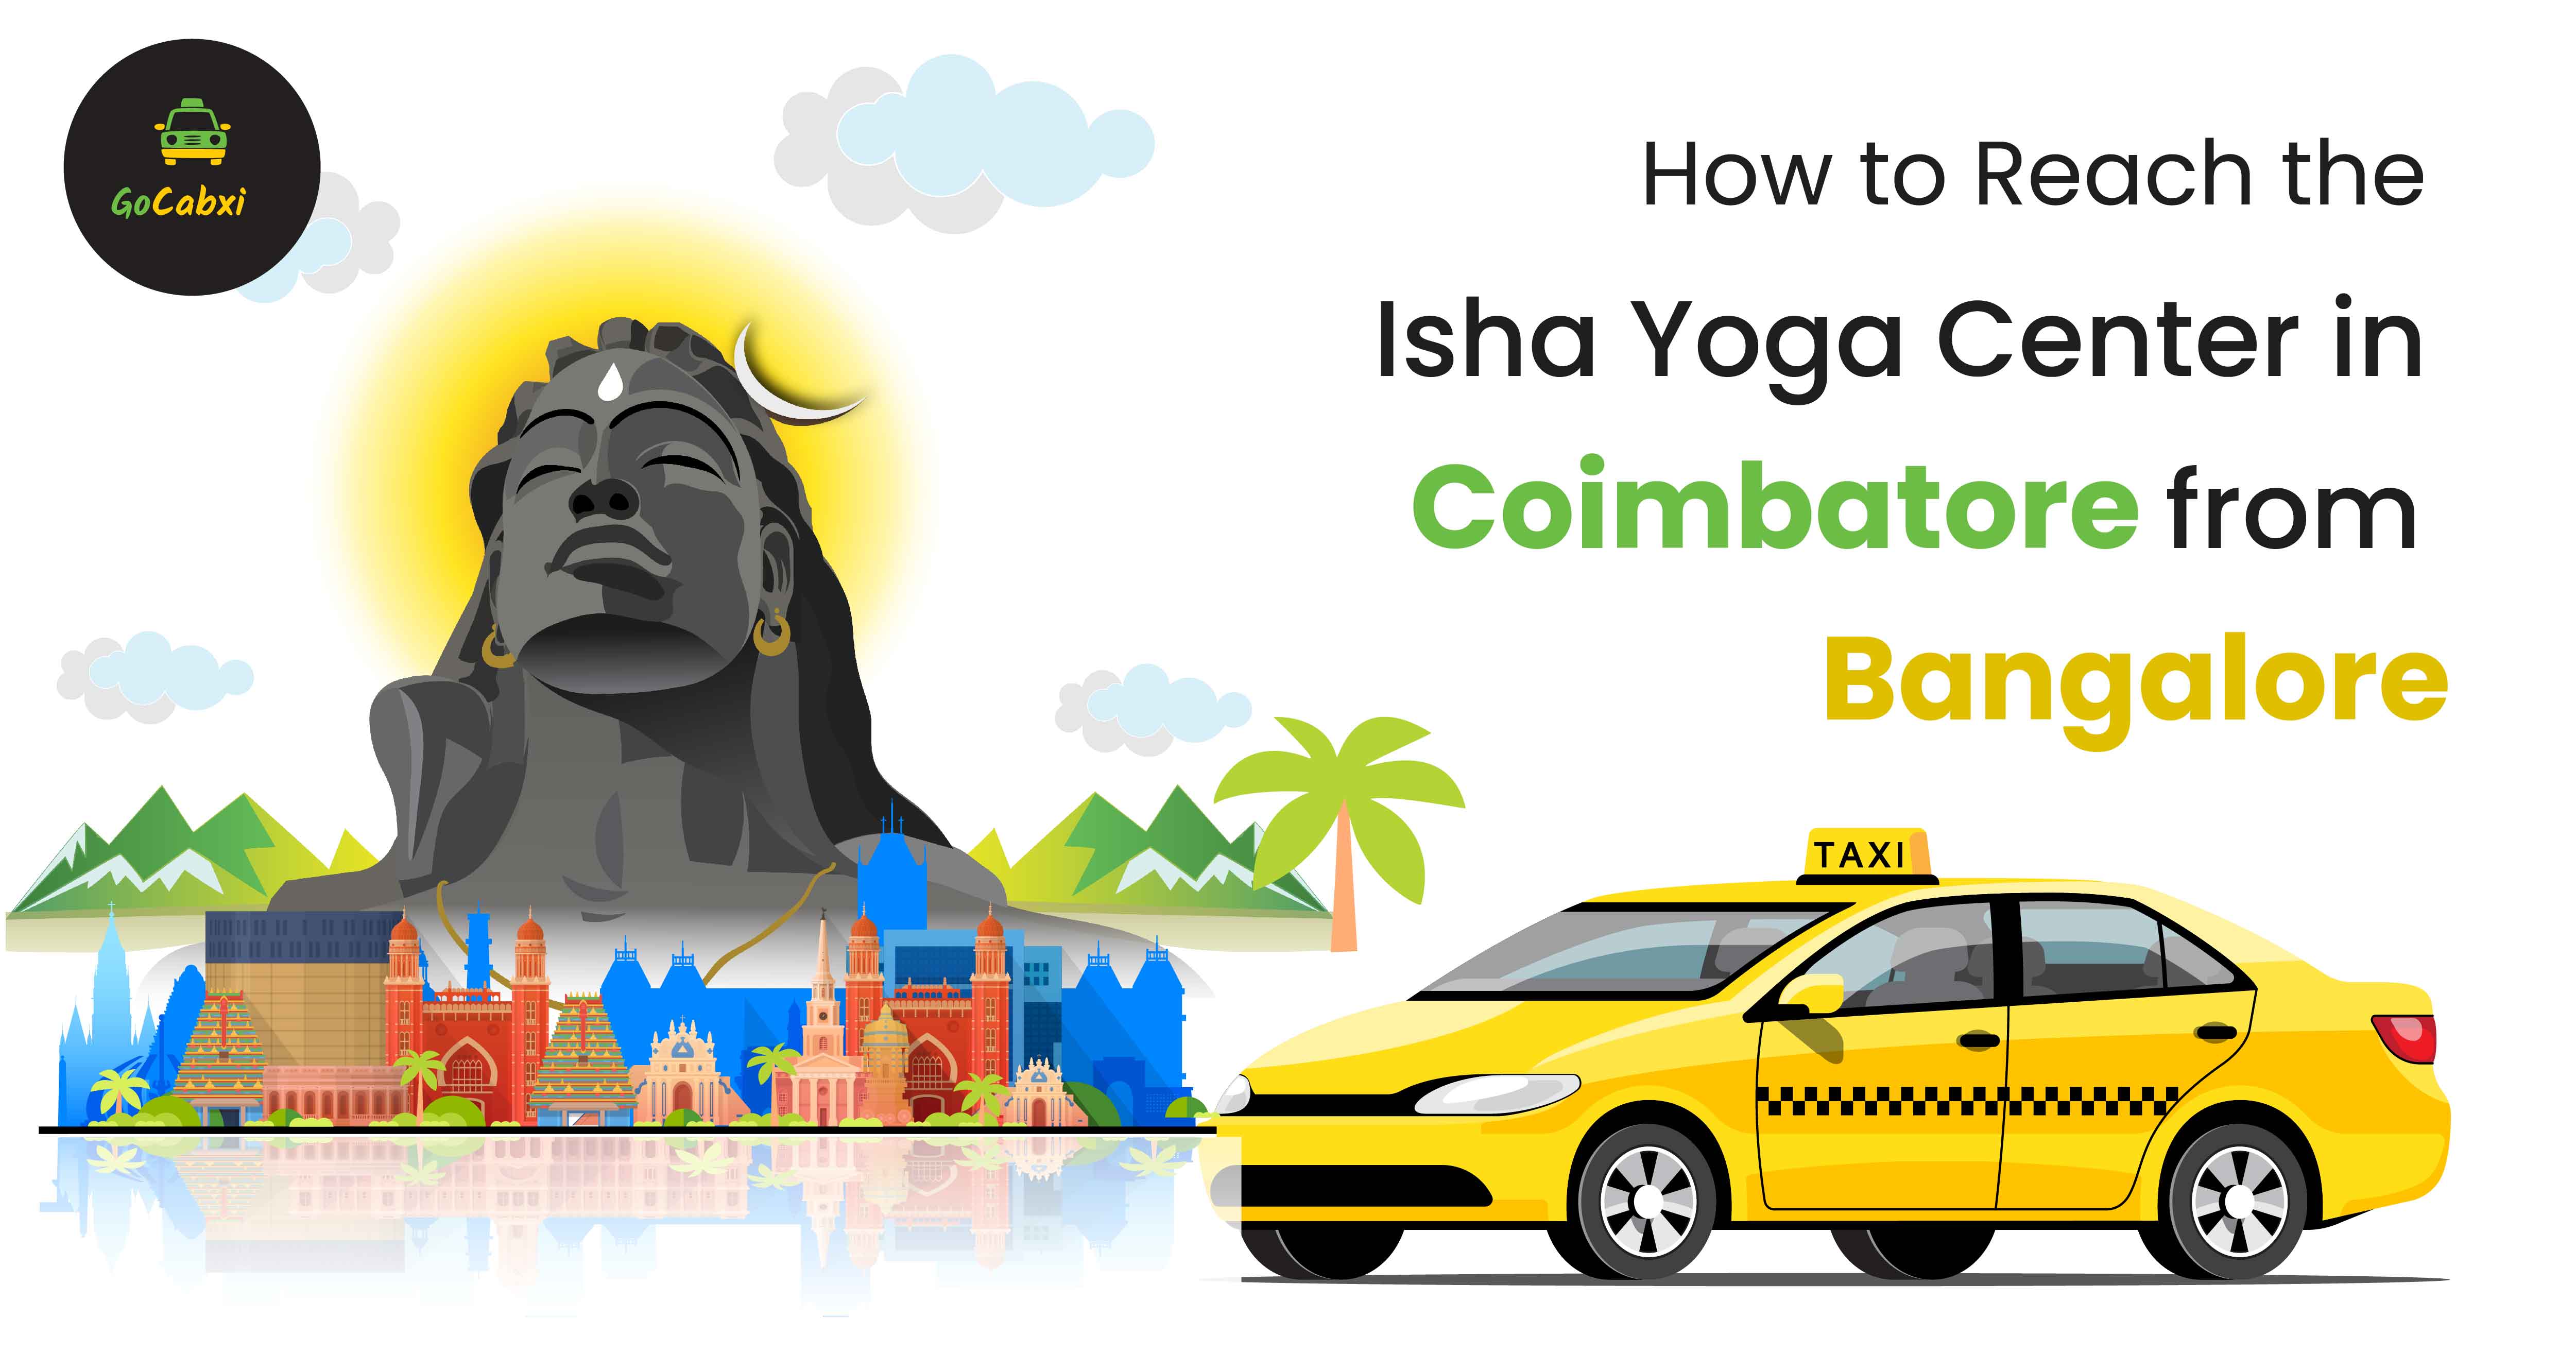 How to Reach the Isha Yoga Center in Coimbatore from Bangalore